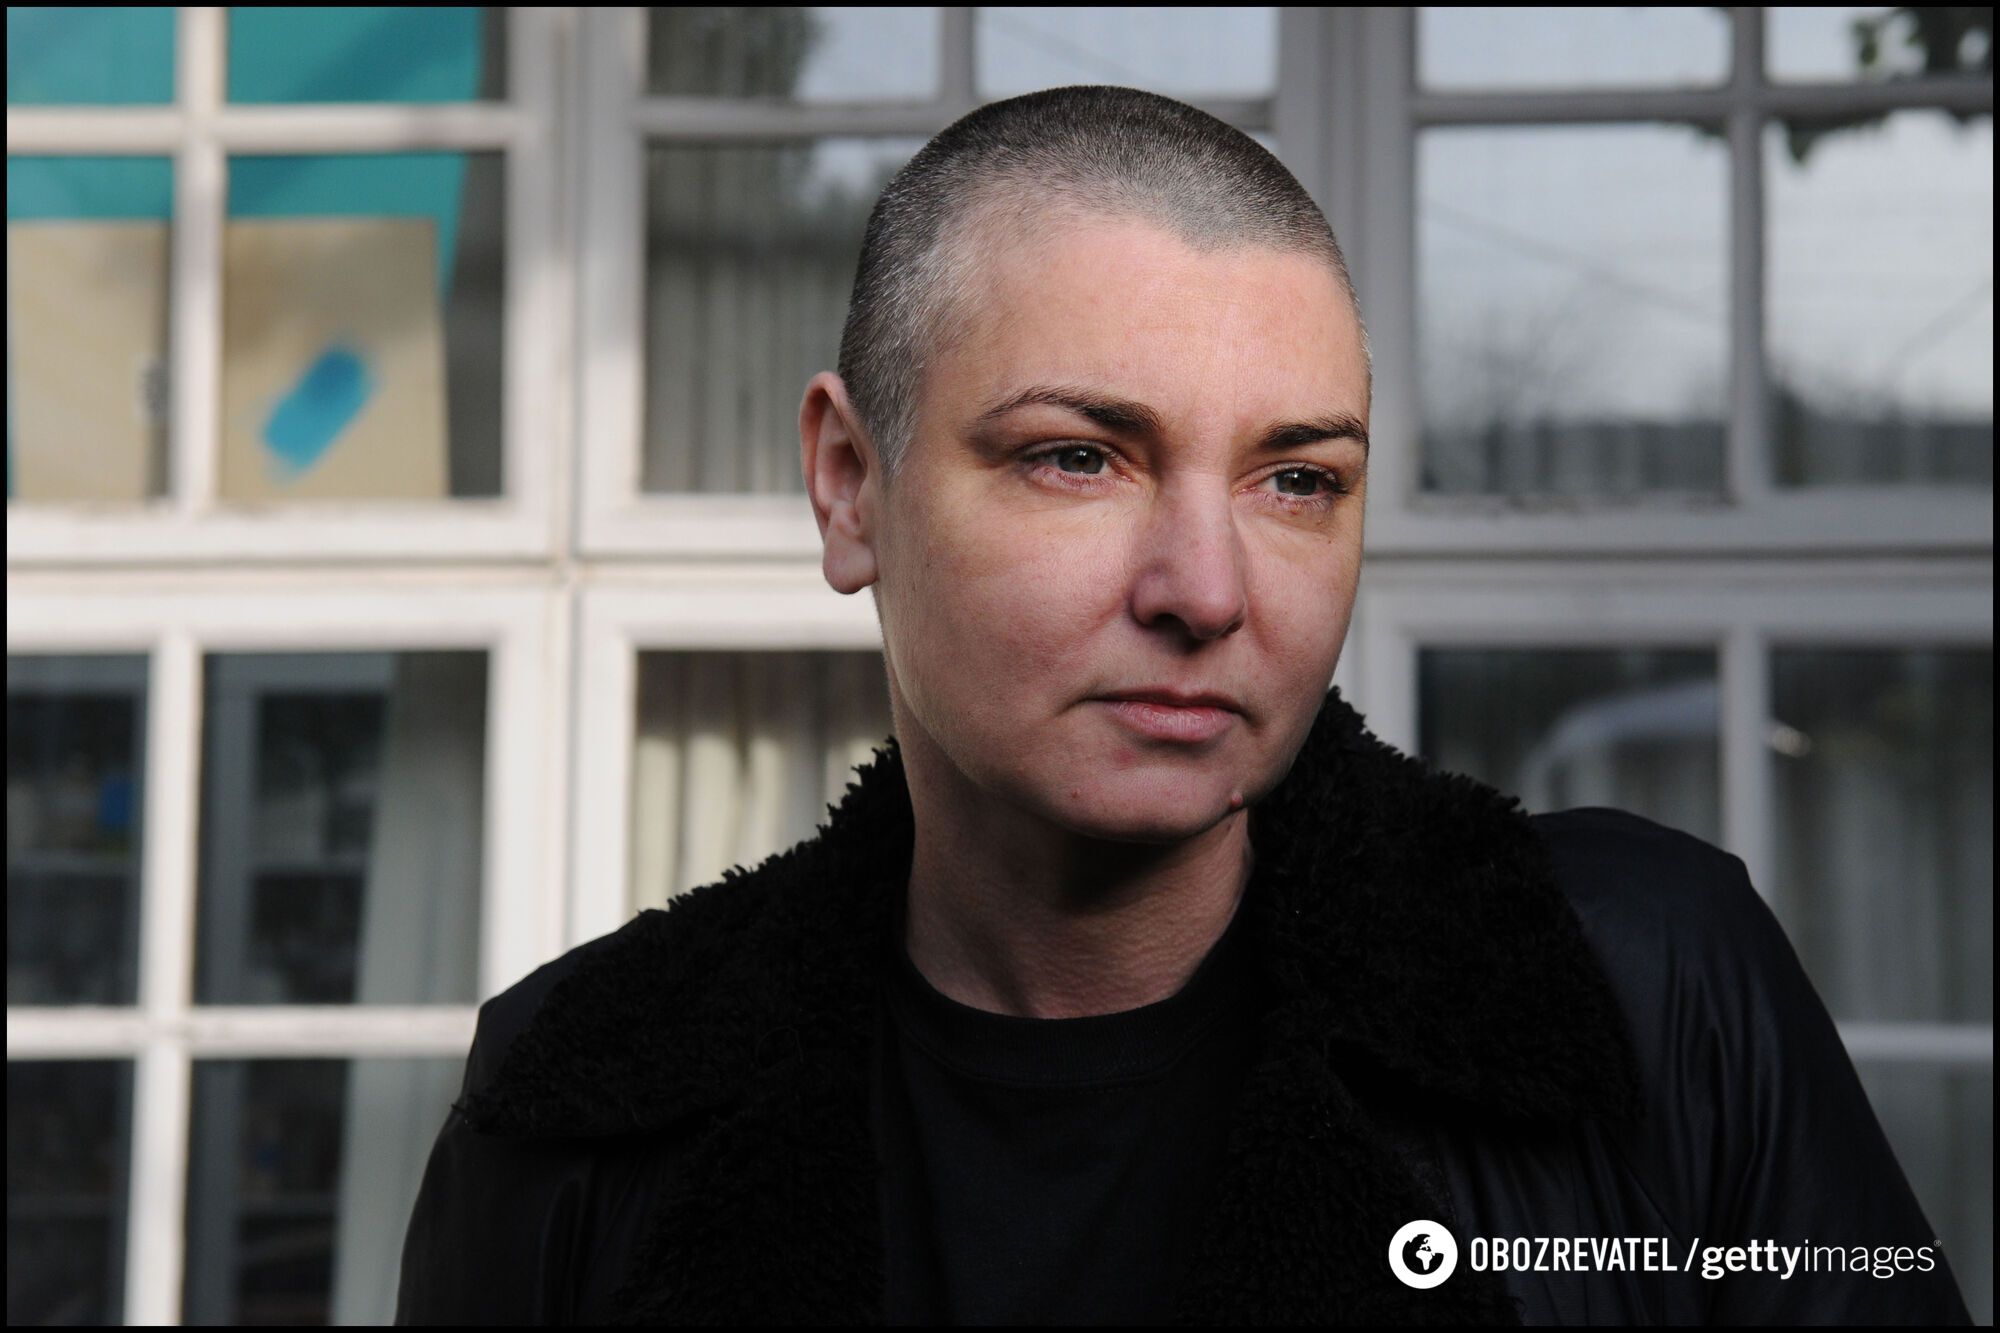 Police reveal details of the death of 56-year-old Irish music legend Sinead O'Connor